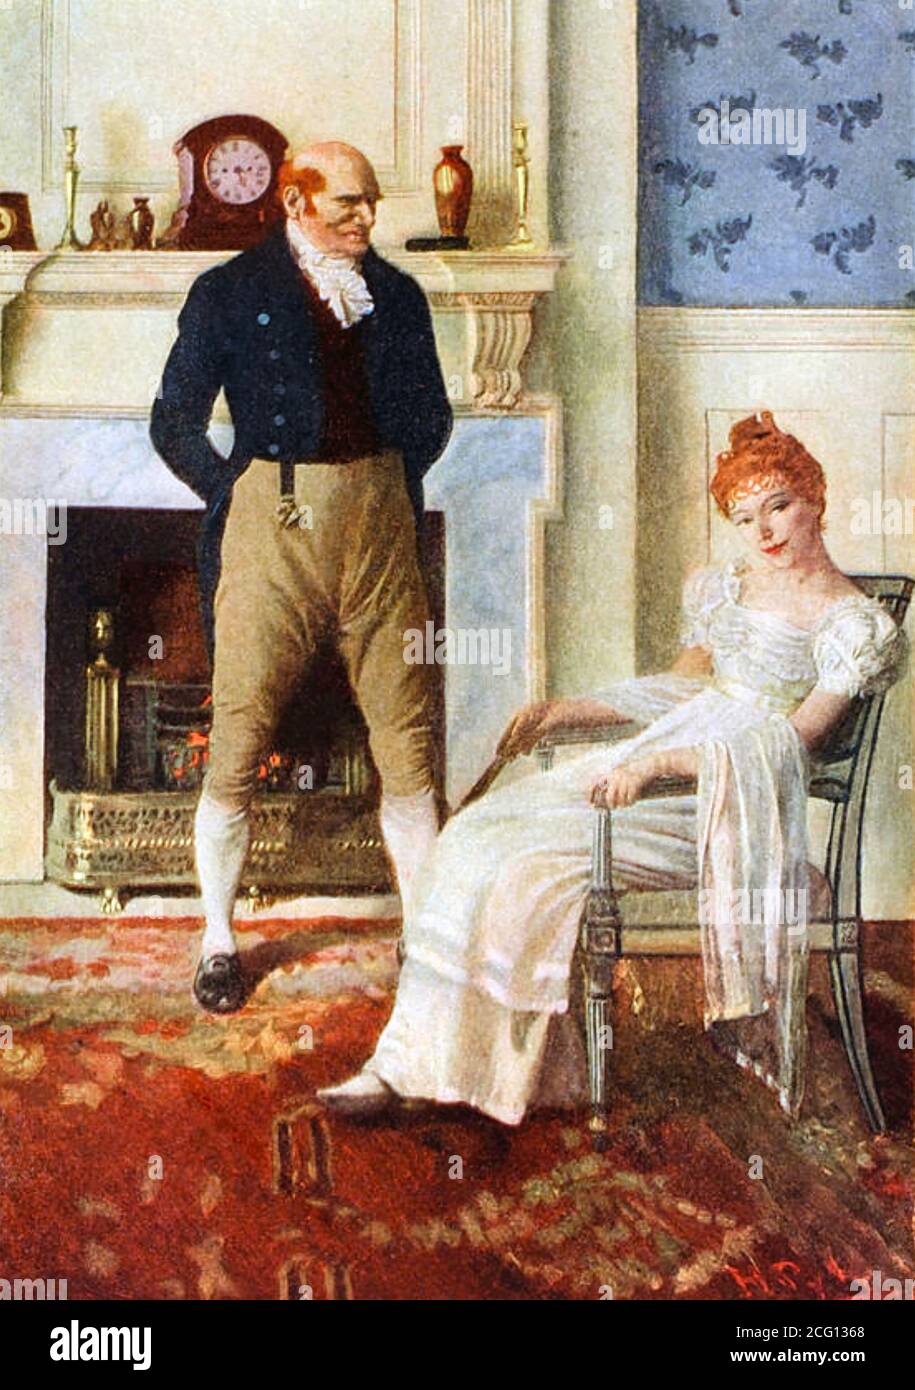 VANITY FAIR by William Makepeace Thackeray published 1847-48. Becky Sharp with Lord Steyne in an illustration by Howard Pyle for the American magazine  'Harper's Monthly' in 1906. Stock Photo